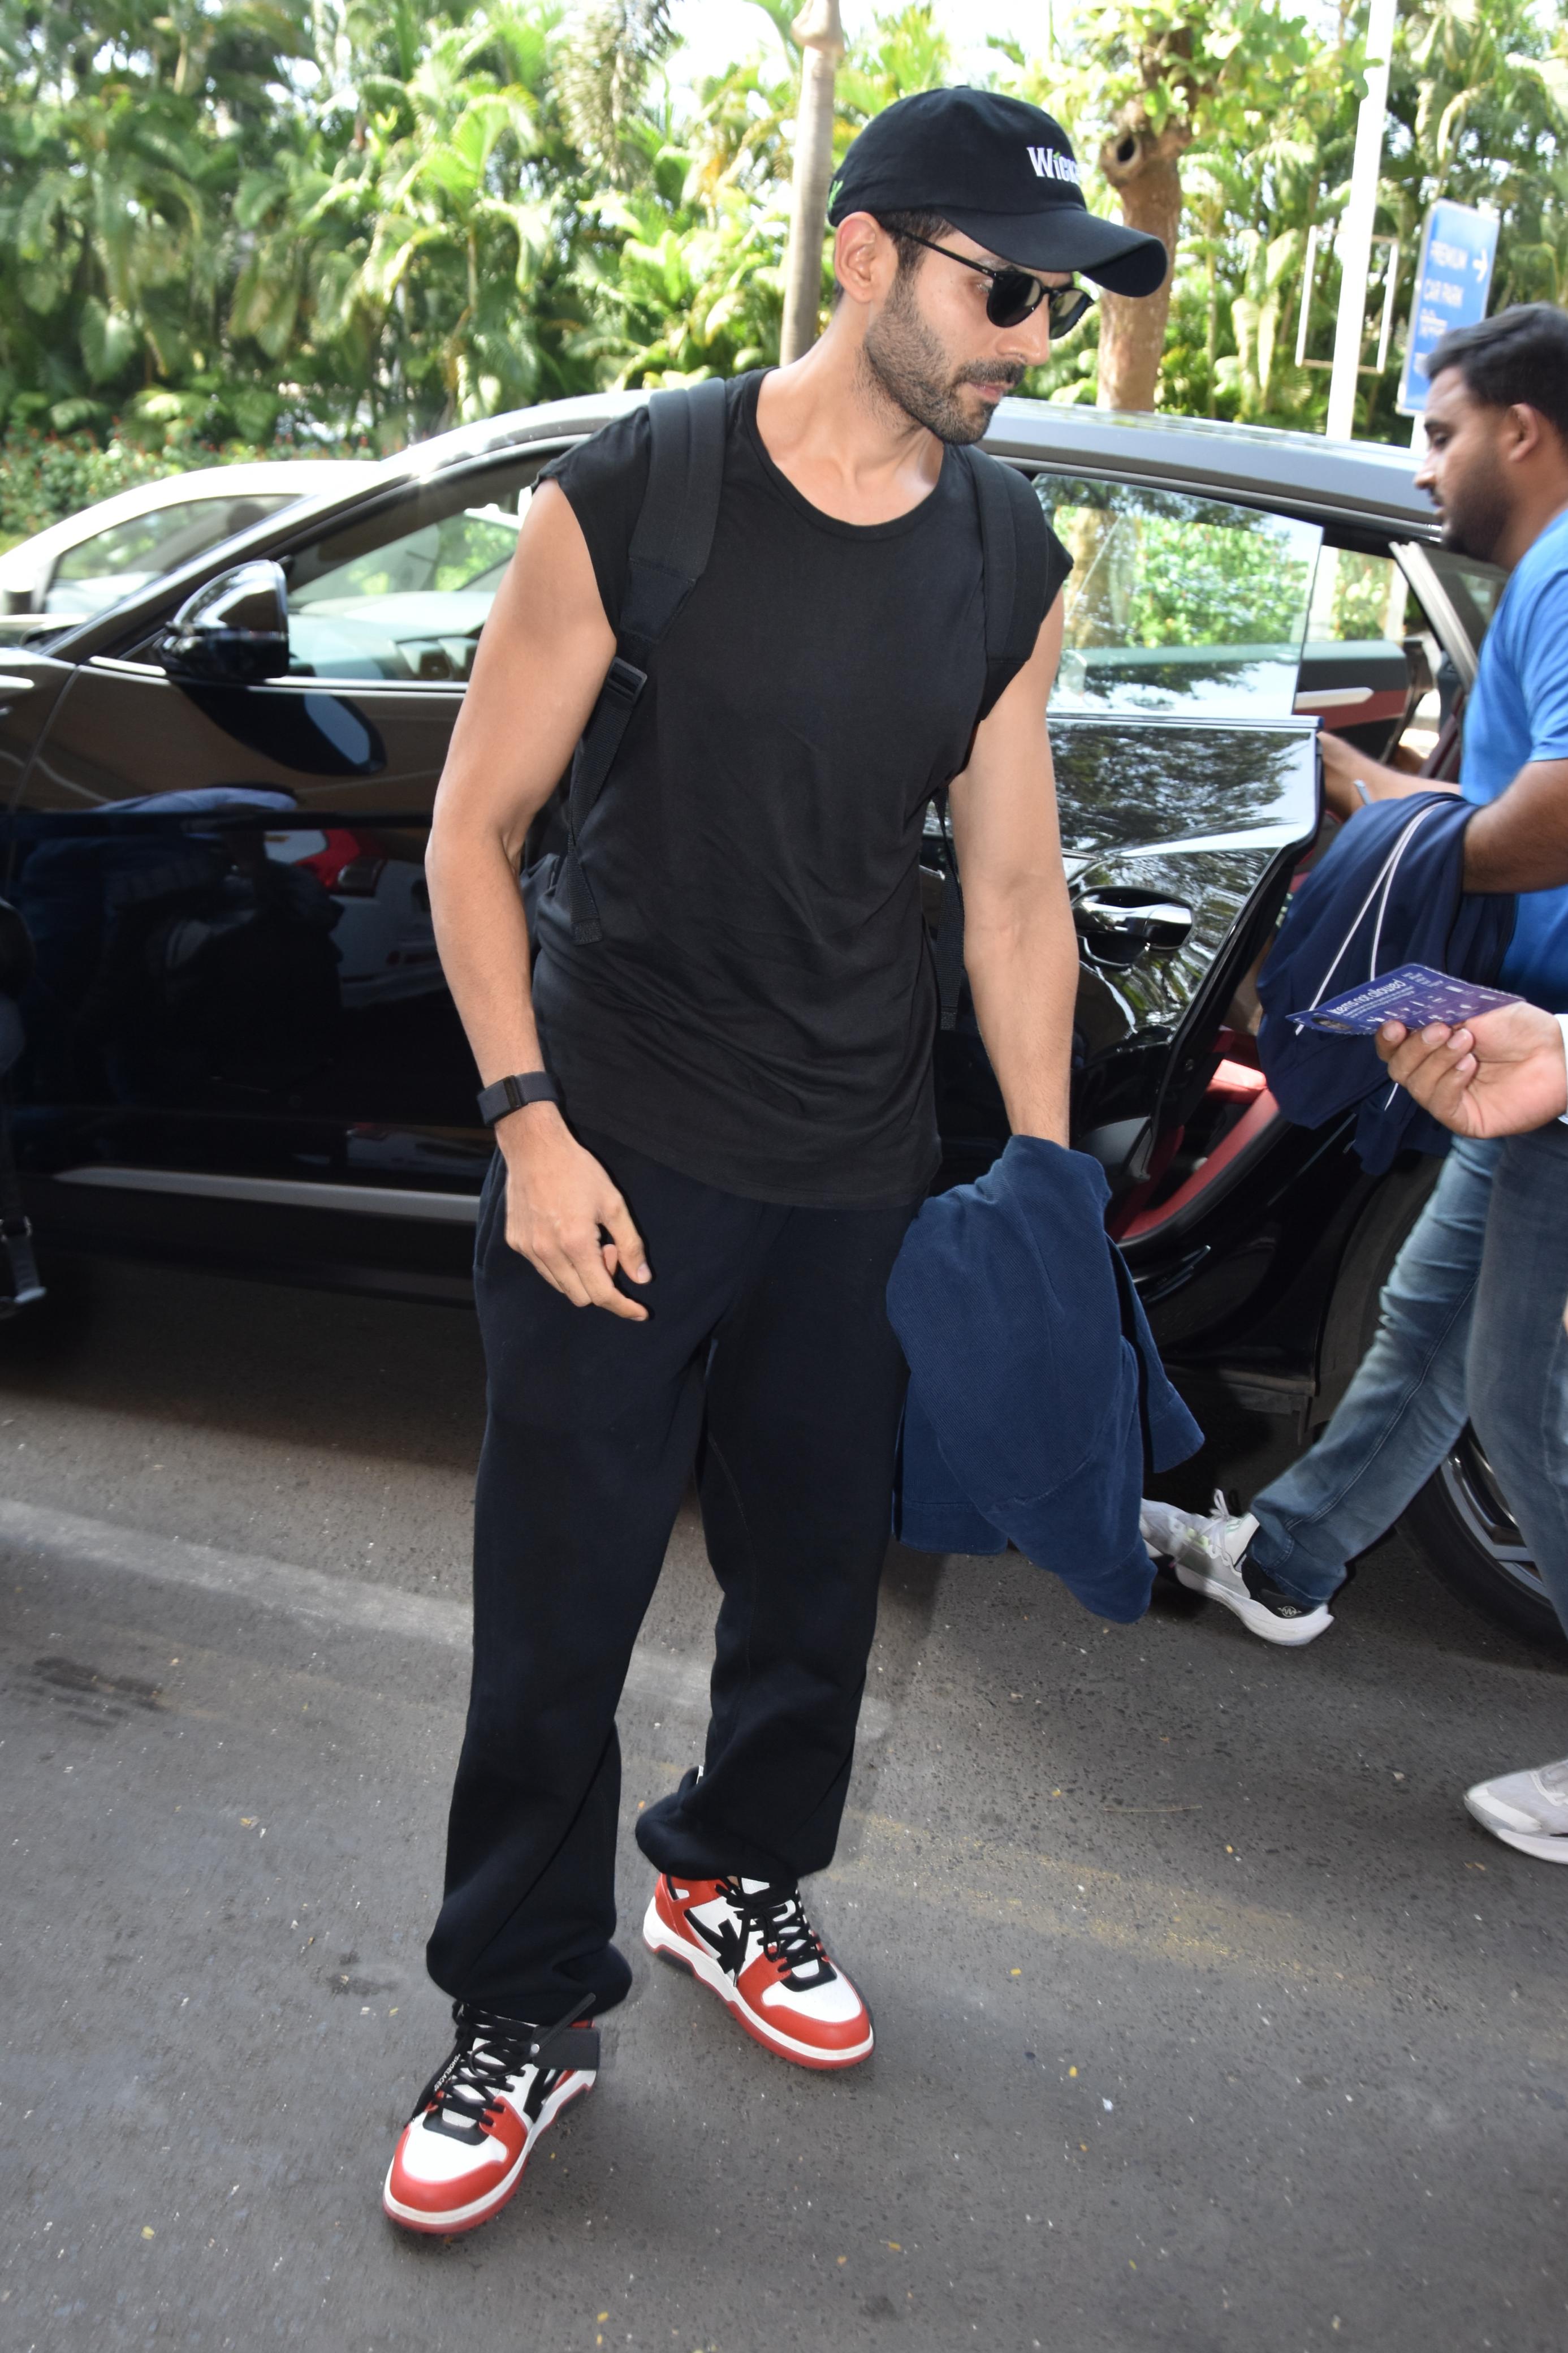 Kartik Aaryan was clicked at T1 (Mumbai airport) this morning. The actor looked cool and casual